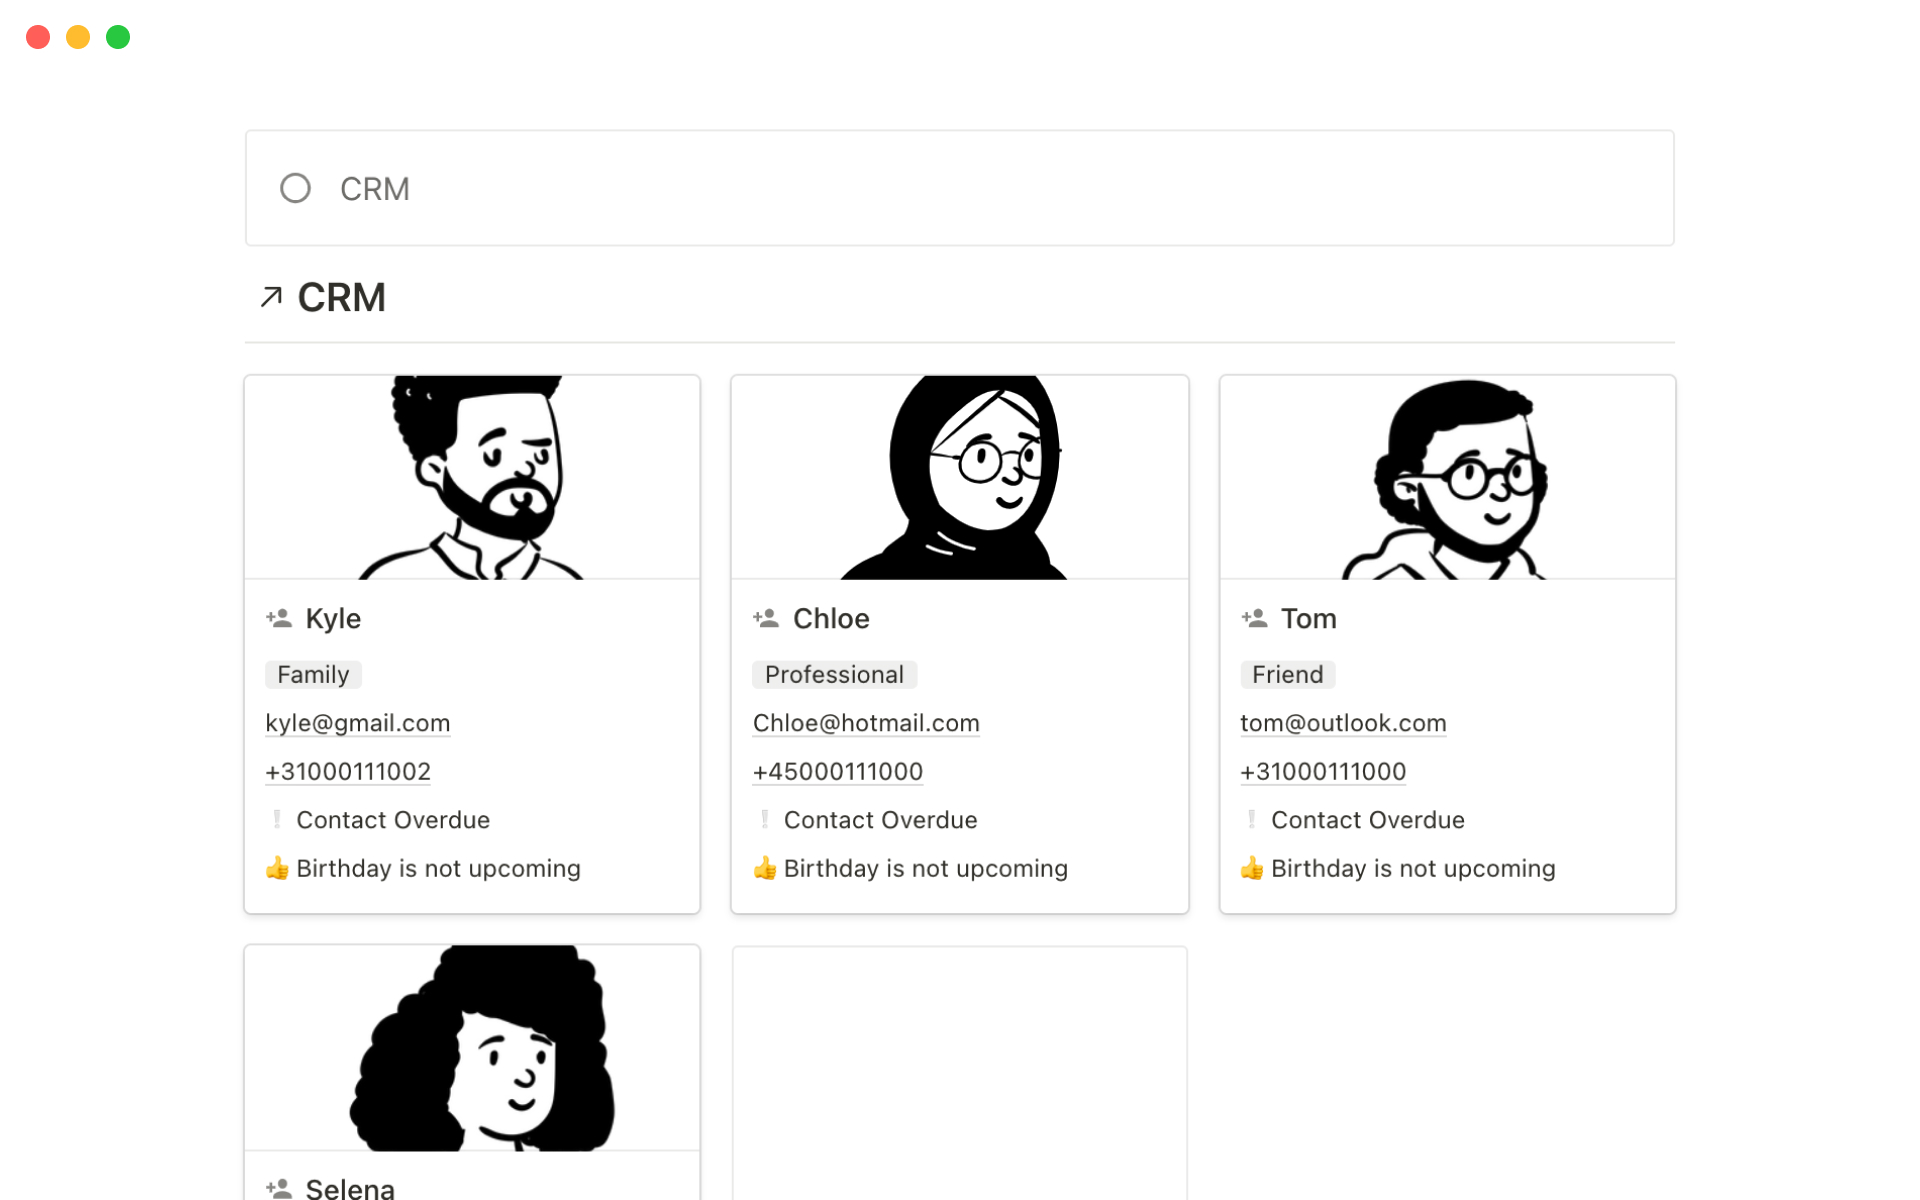 A CRM dashboard to take control of your personal and professional relationships.